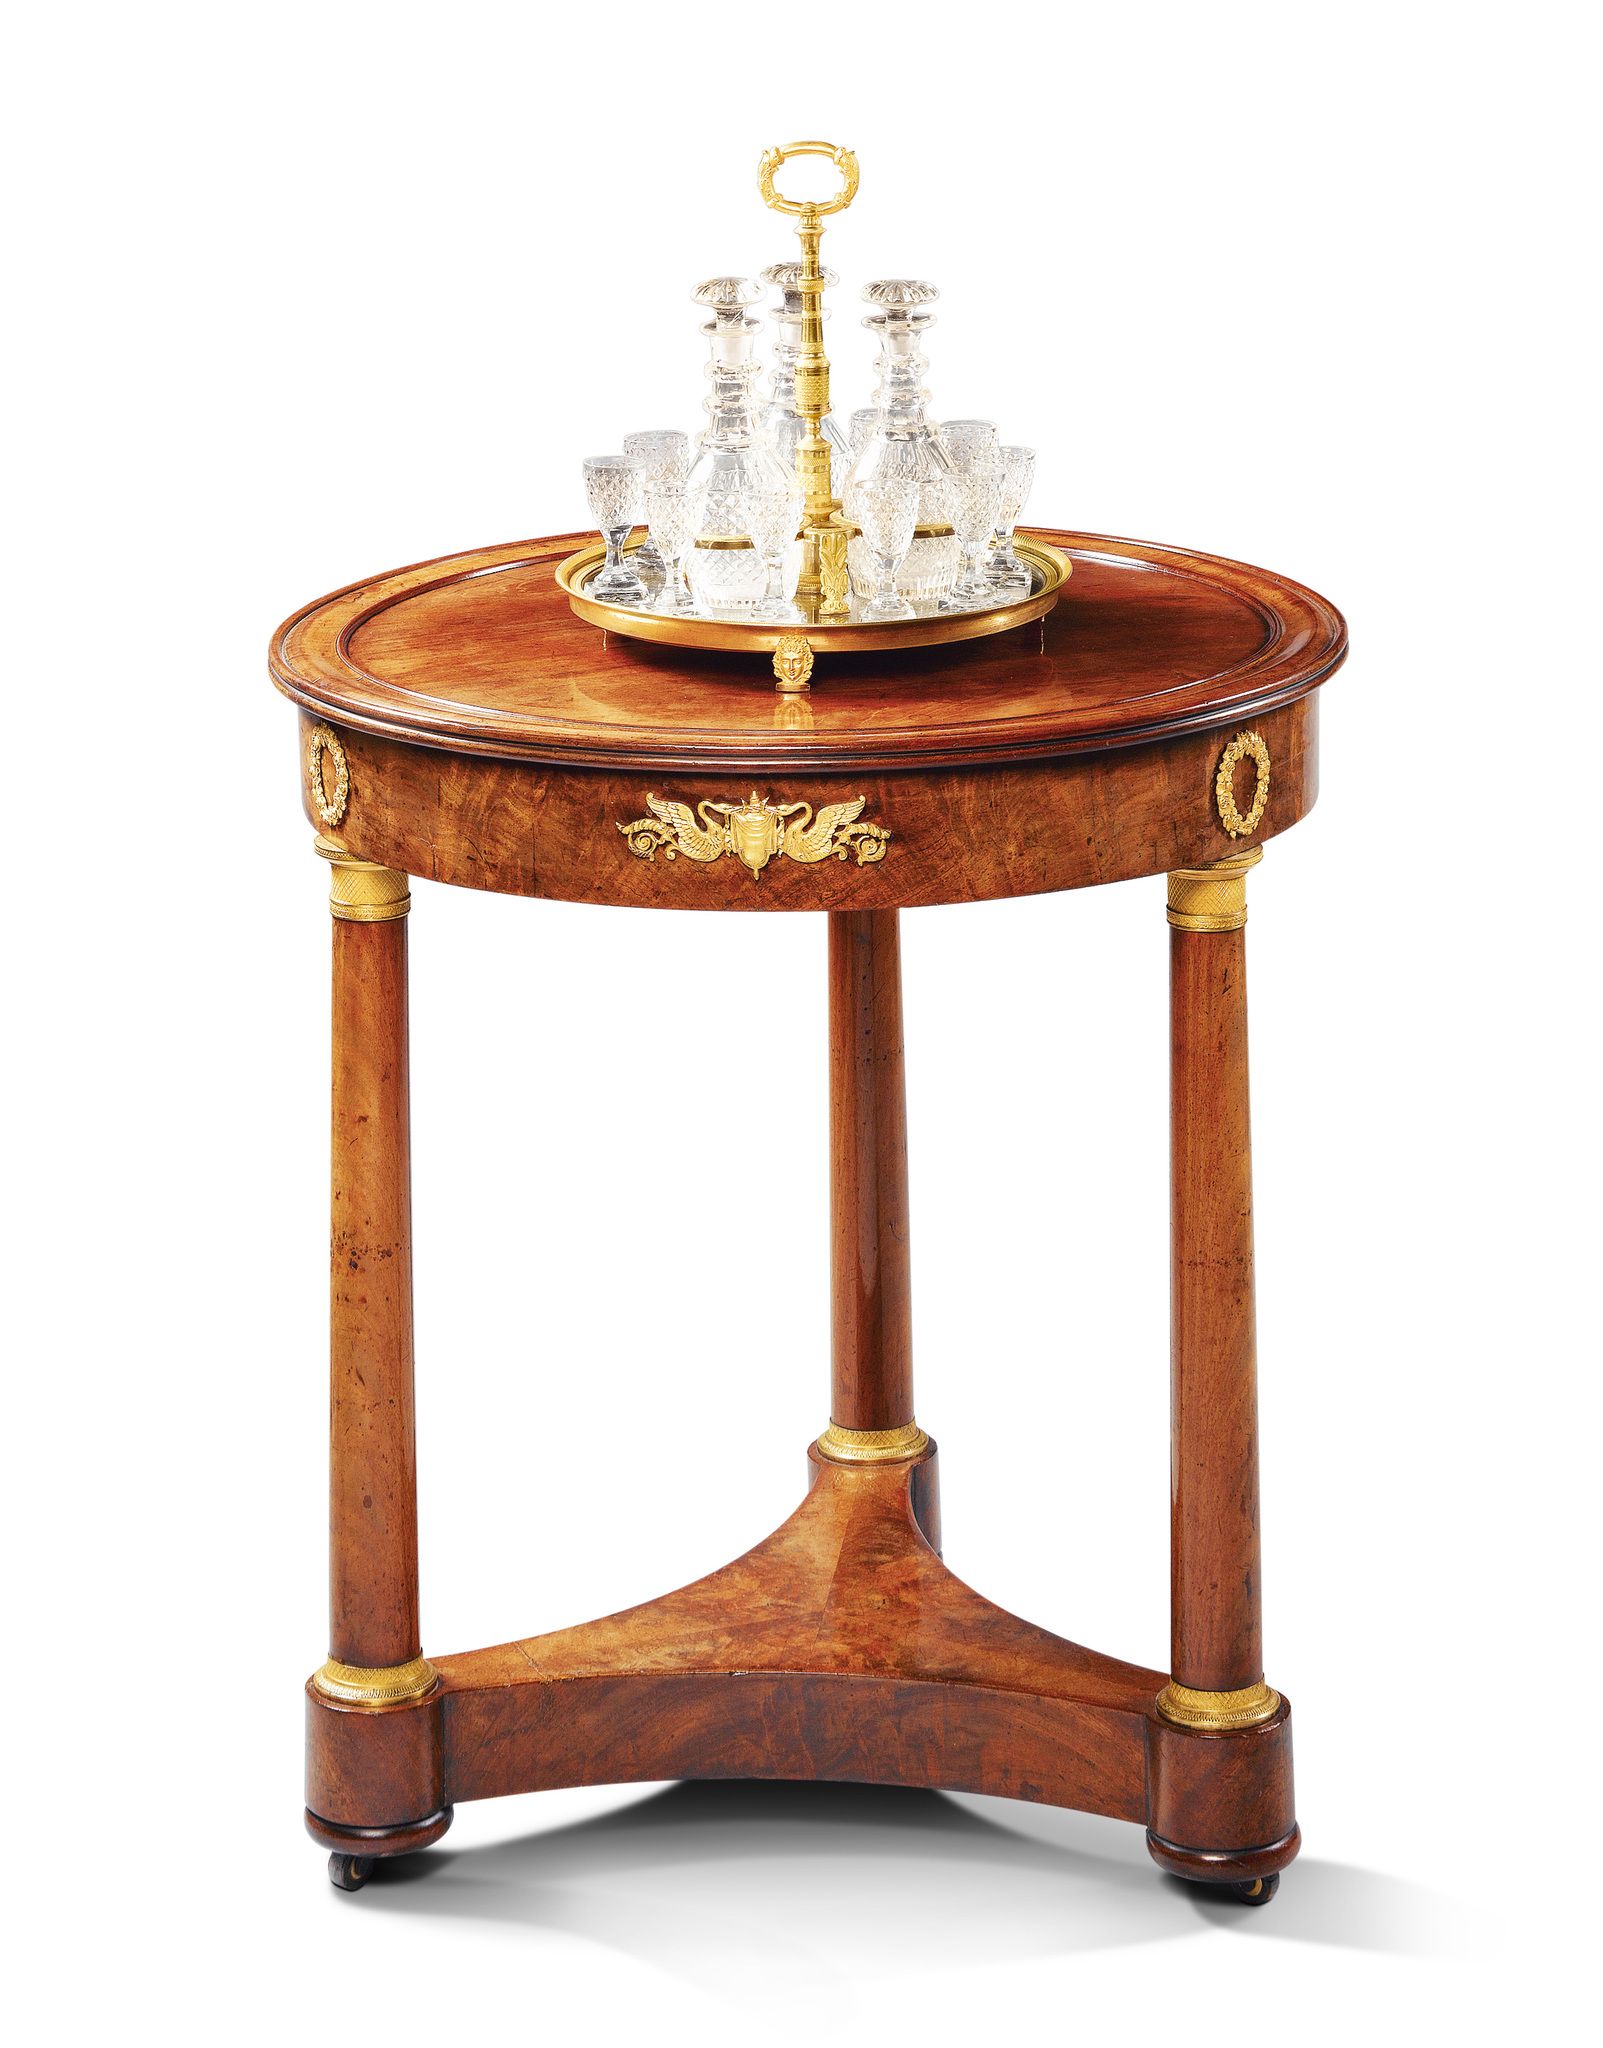 A Circular French Empire Mahogany Gueridon France circa 1820, the top of finely faded colour with